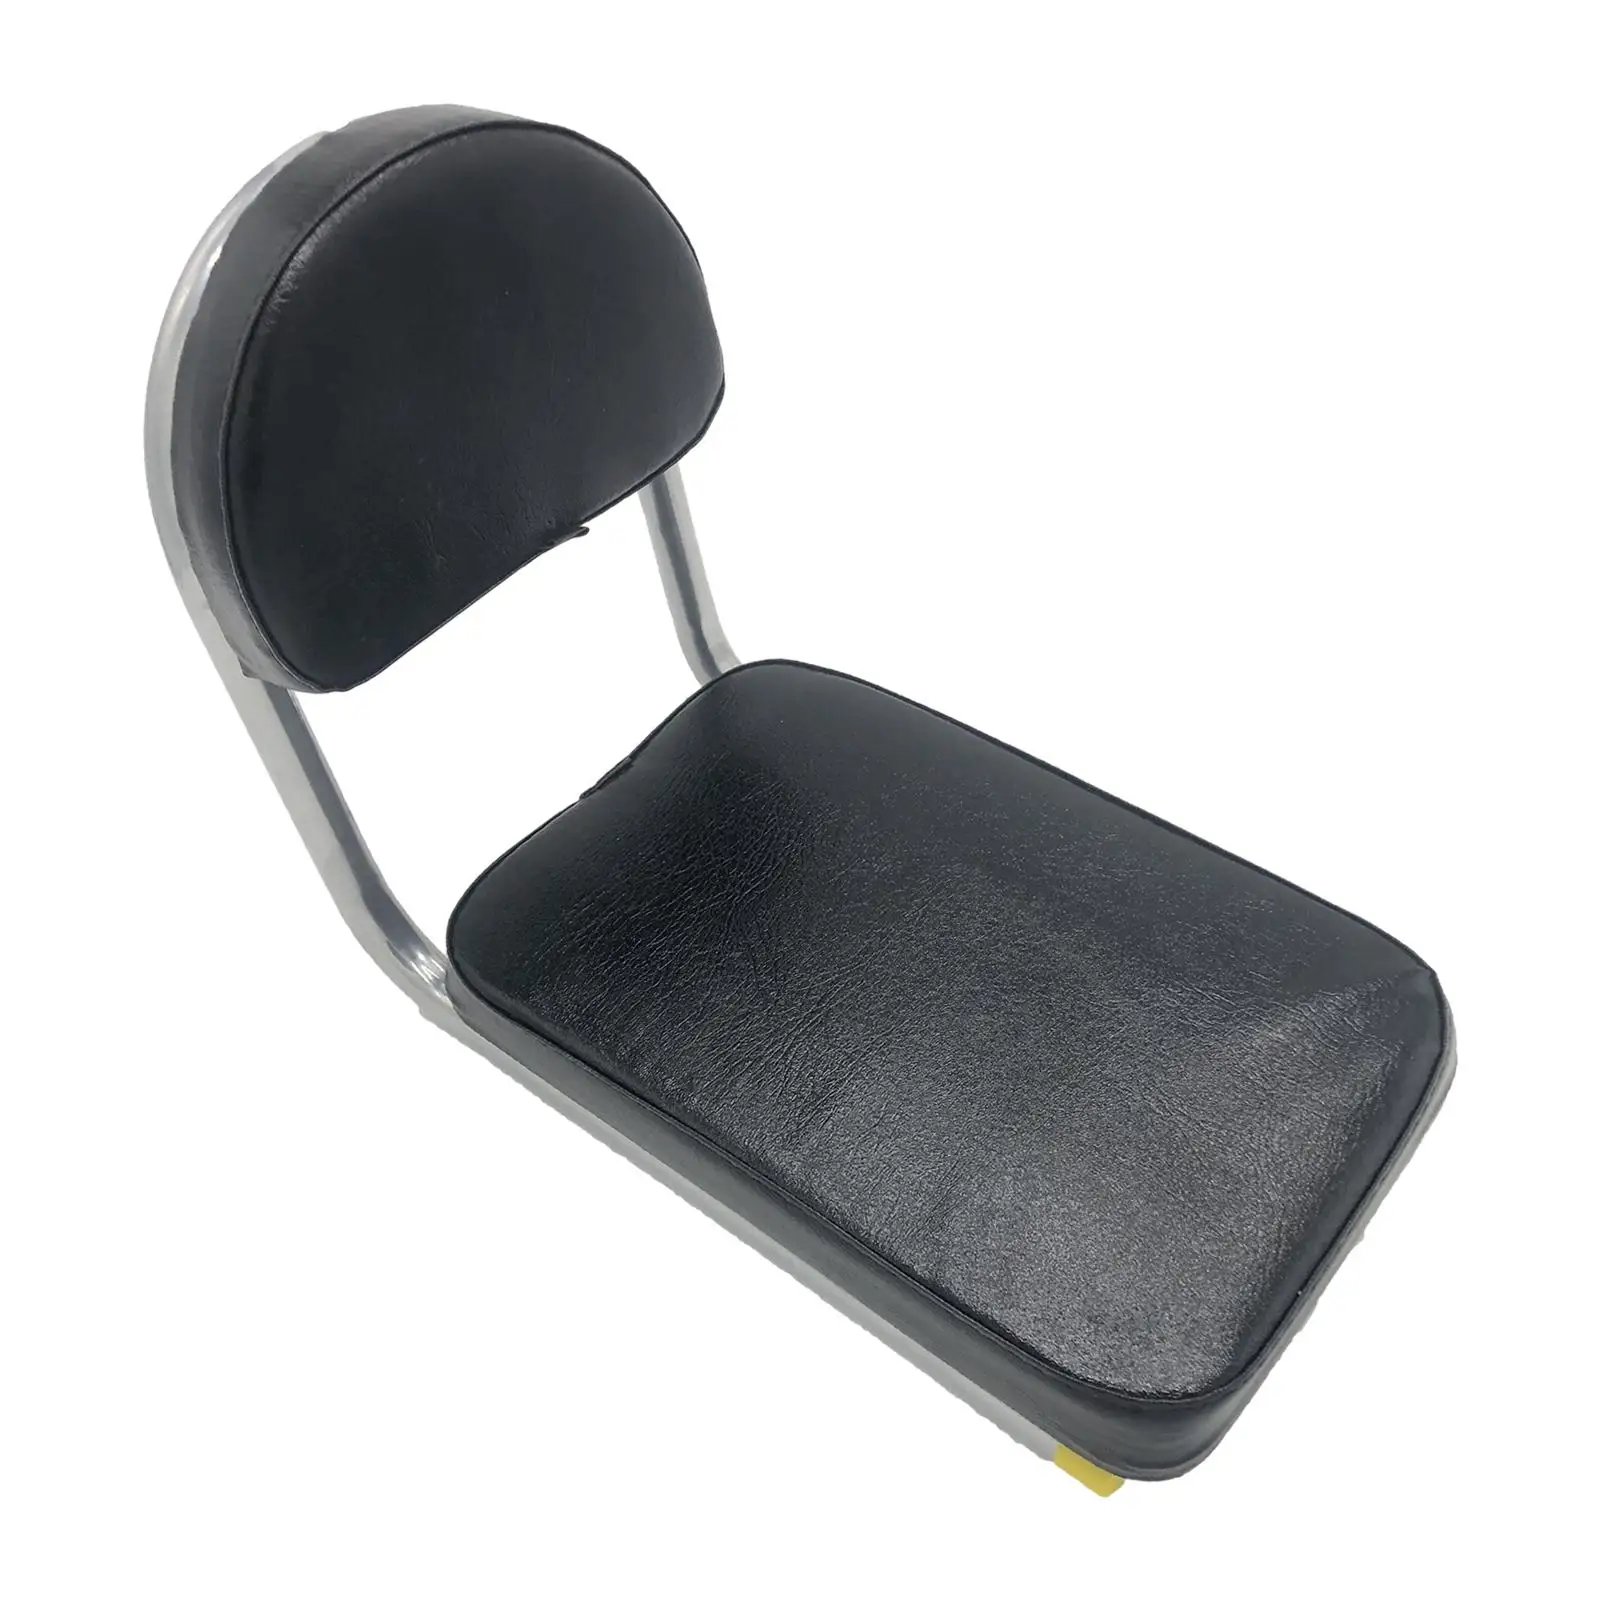 Bicycle Rear Seat Portable Easy Cleaning with Back Rest Bike Back Seat Back Saddle for Touring Outdoor Biking Riding Accessory